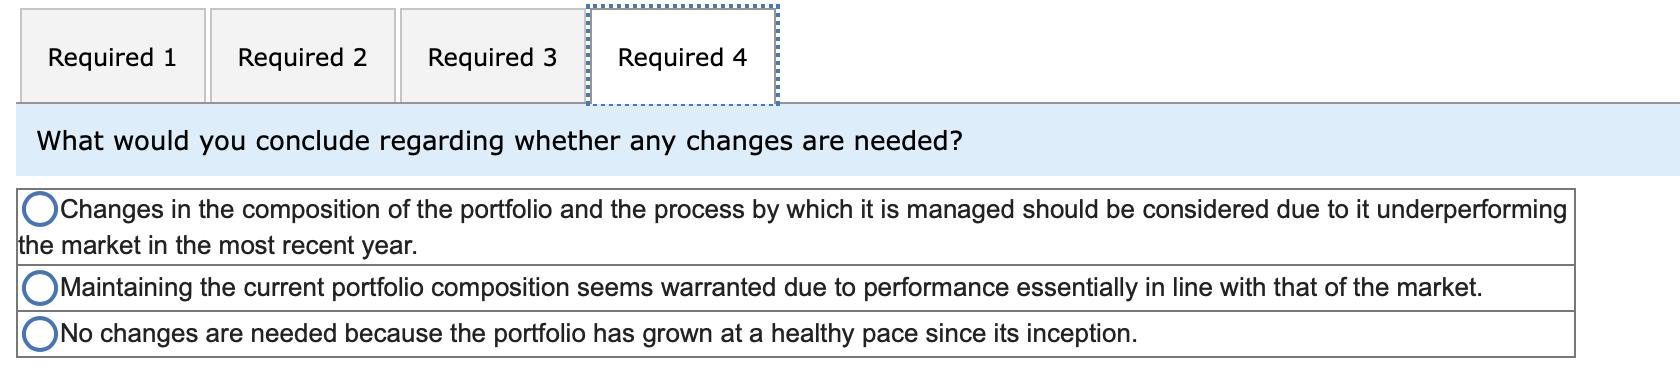 Required 1 Required 2 Required 3 Required 4 What would you conclude regarding whether any changes are needed? Changes in the